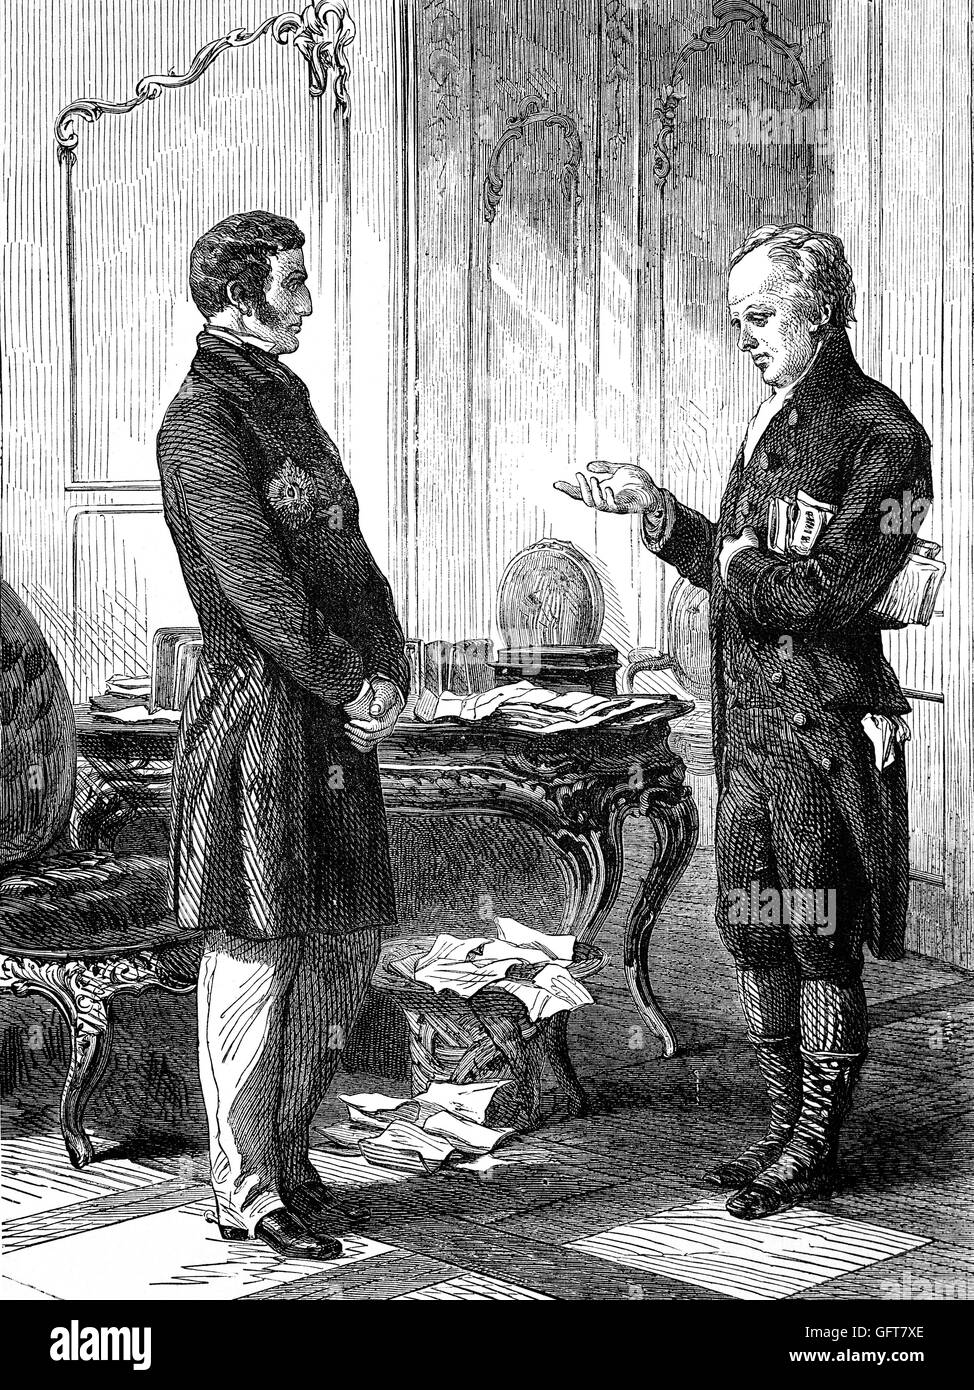 William Allen FRS FLS FGS (1770 – 1843) meeting the Duke of Wellington. Allen was an English scientist and philanthropist who opposed slavery and engaged in schemes of social and penal improvement in early nineteenth-century England. Stock Photo